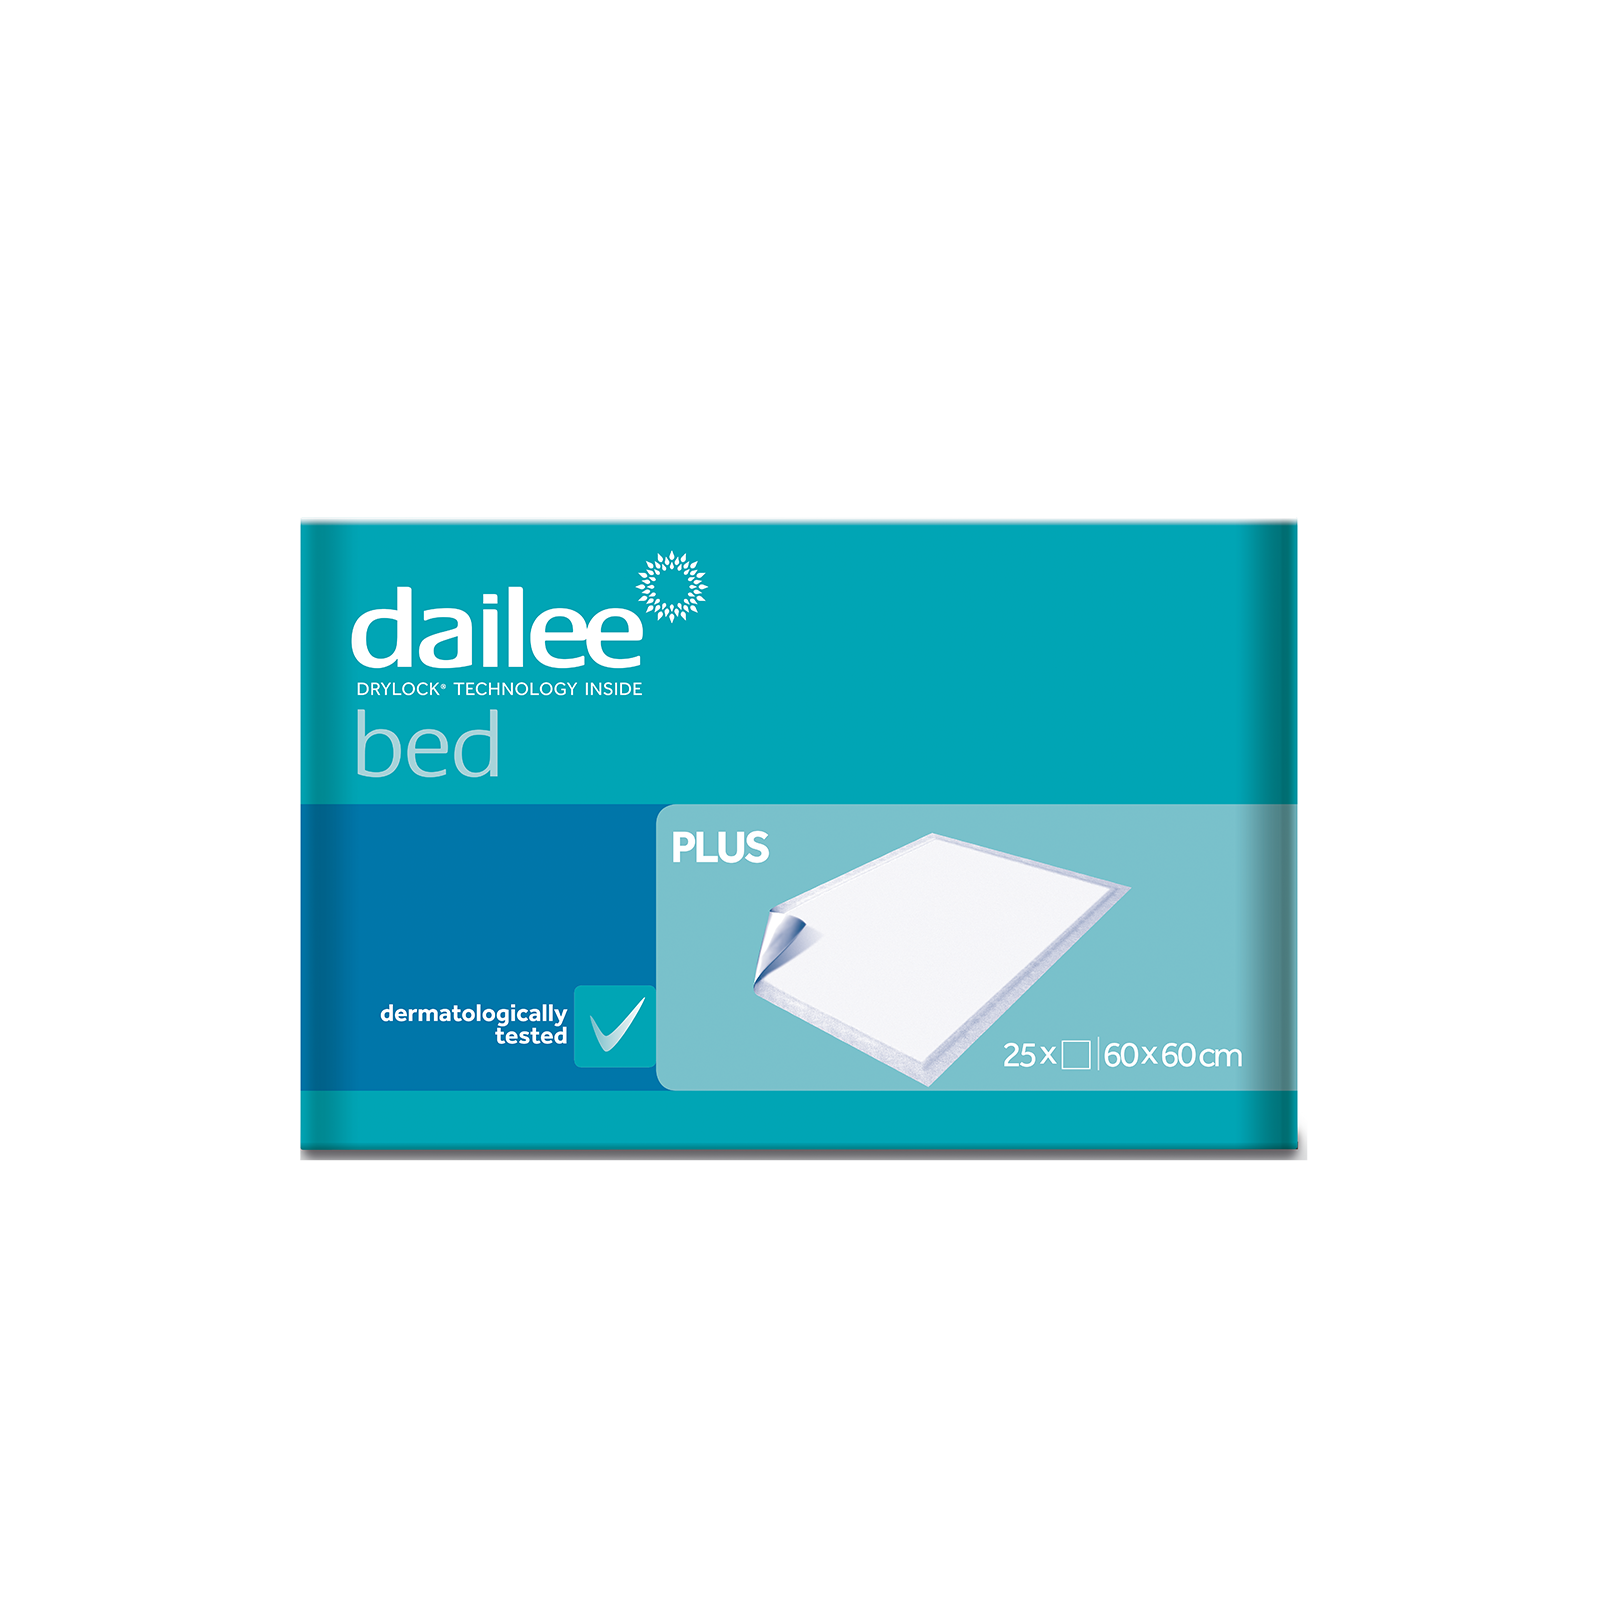 dailee_bed_plus_performer_thumb